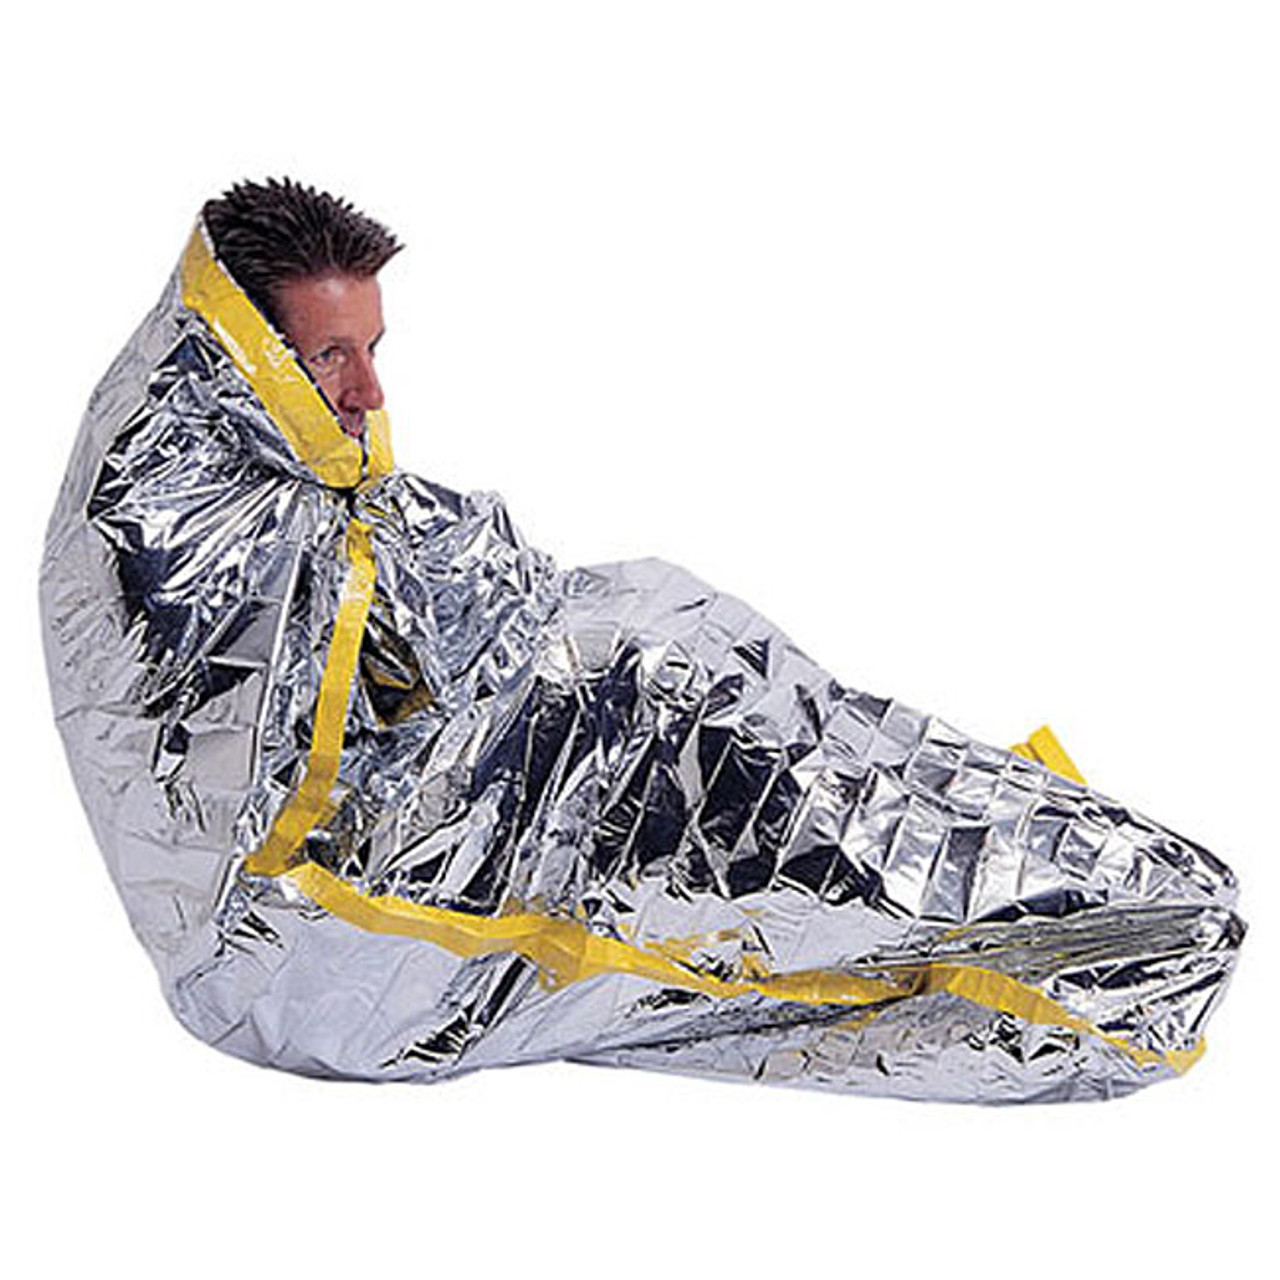 Grizzly Gear Emergency Survival Mylar Thermal 2 Person Sleeping Bag 64 X 87 Accommodates 2 Adults 